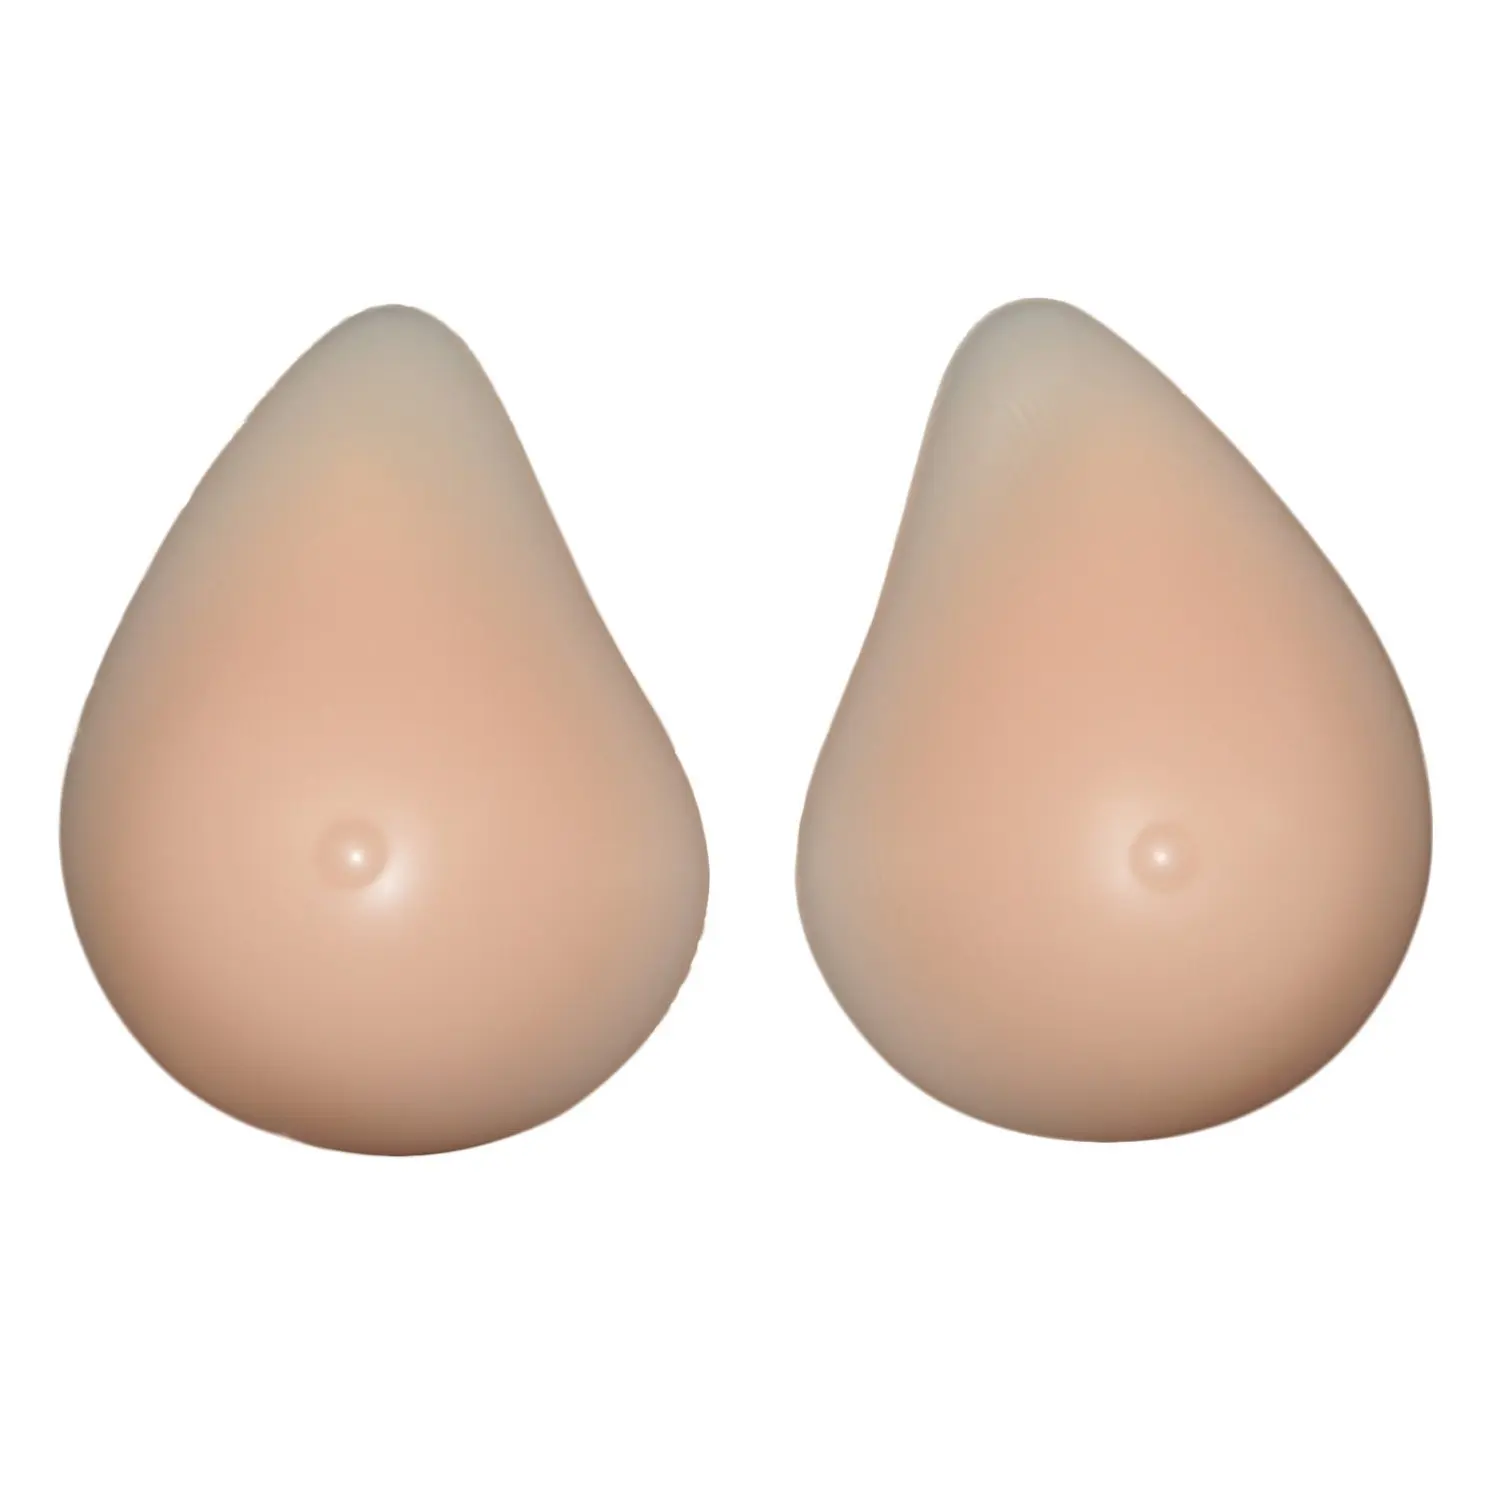 E-FAK 1 Pair Silicone Breast Forms Bra Enhancer Inserts TV TG 